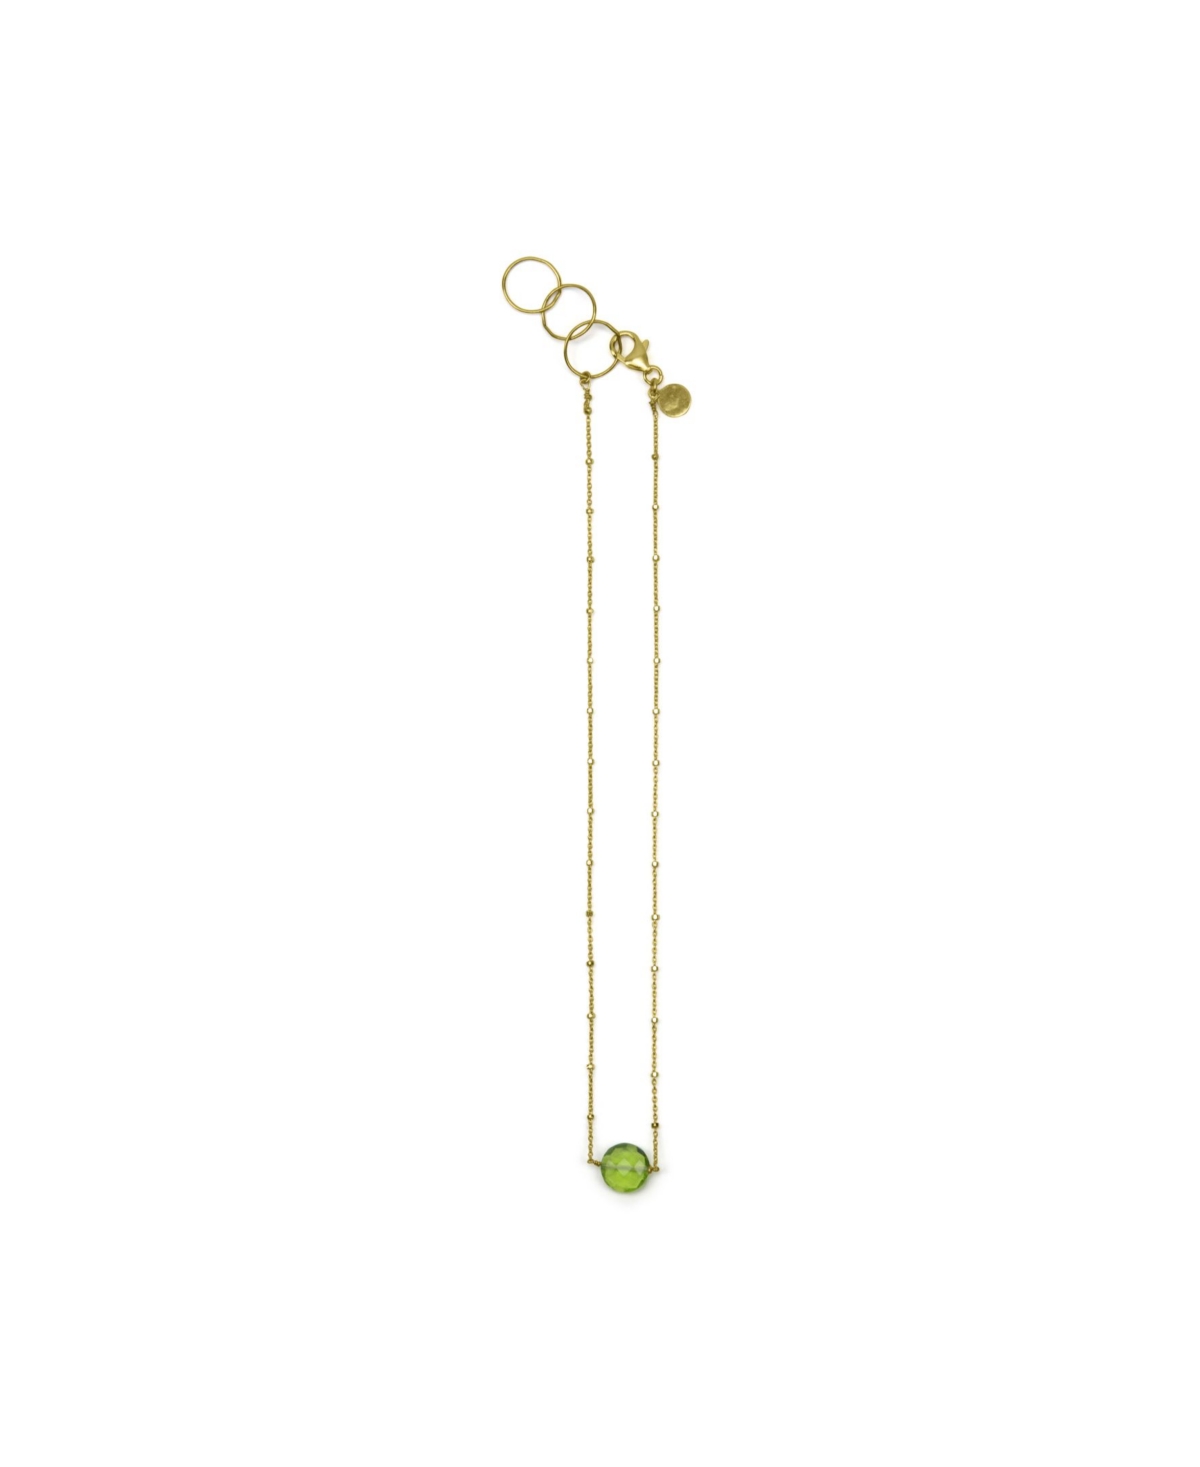 Diamond Cut 14K Gold Fill Chain Necklace with Fully Faceted Round Peridot - Gold - Fill